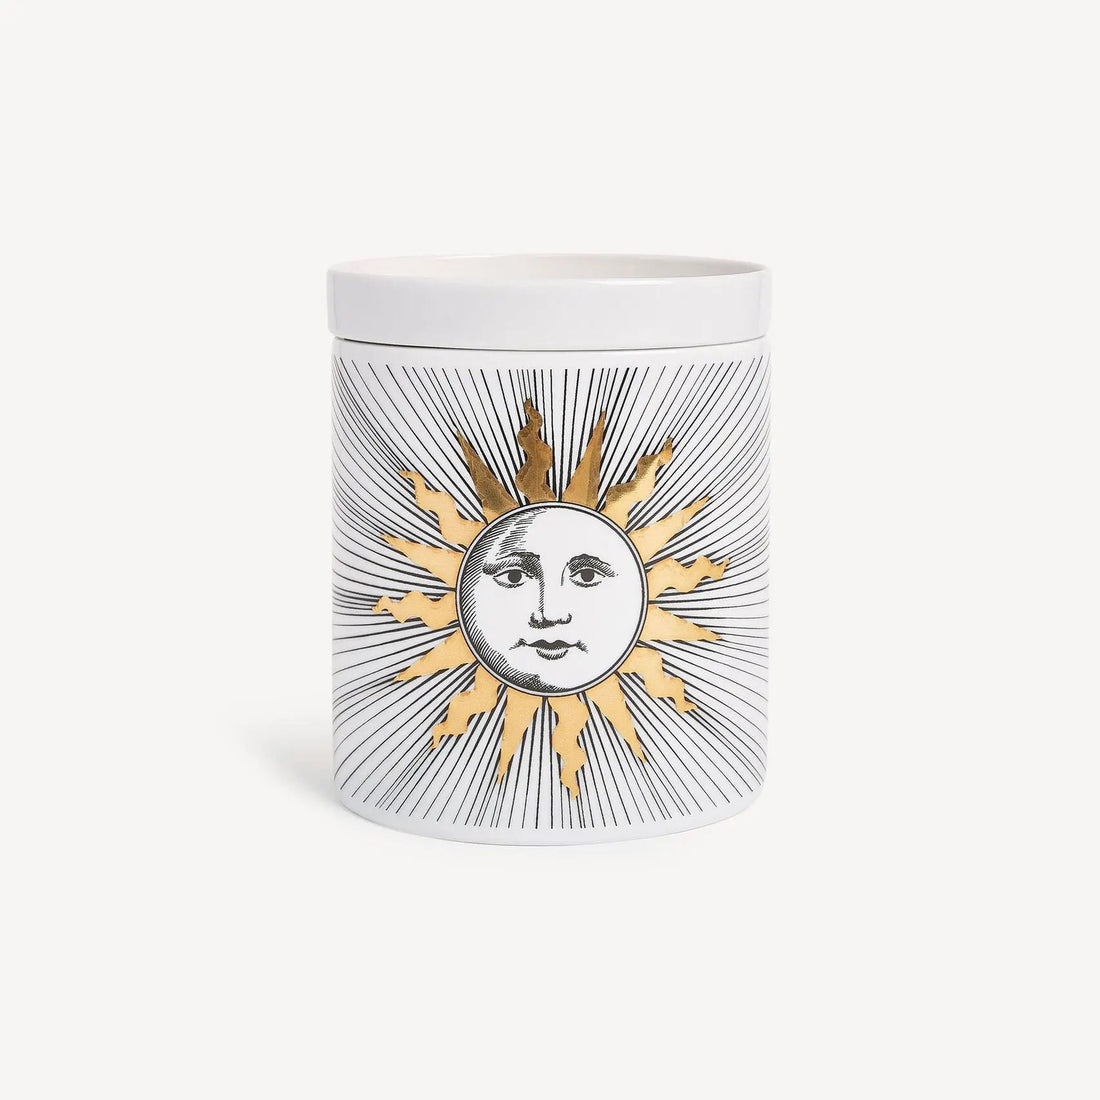 MEANWHILE Large Candle Soli Fornasetti 1Kg